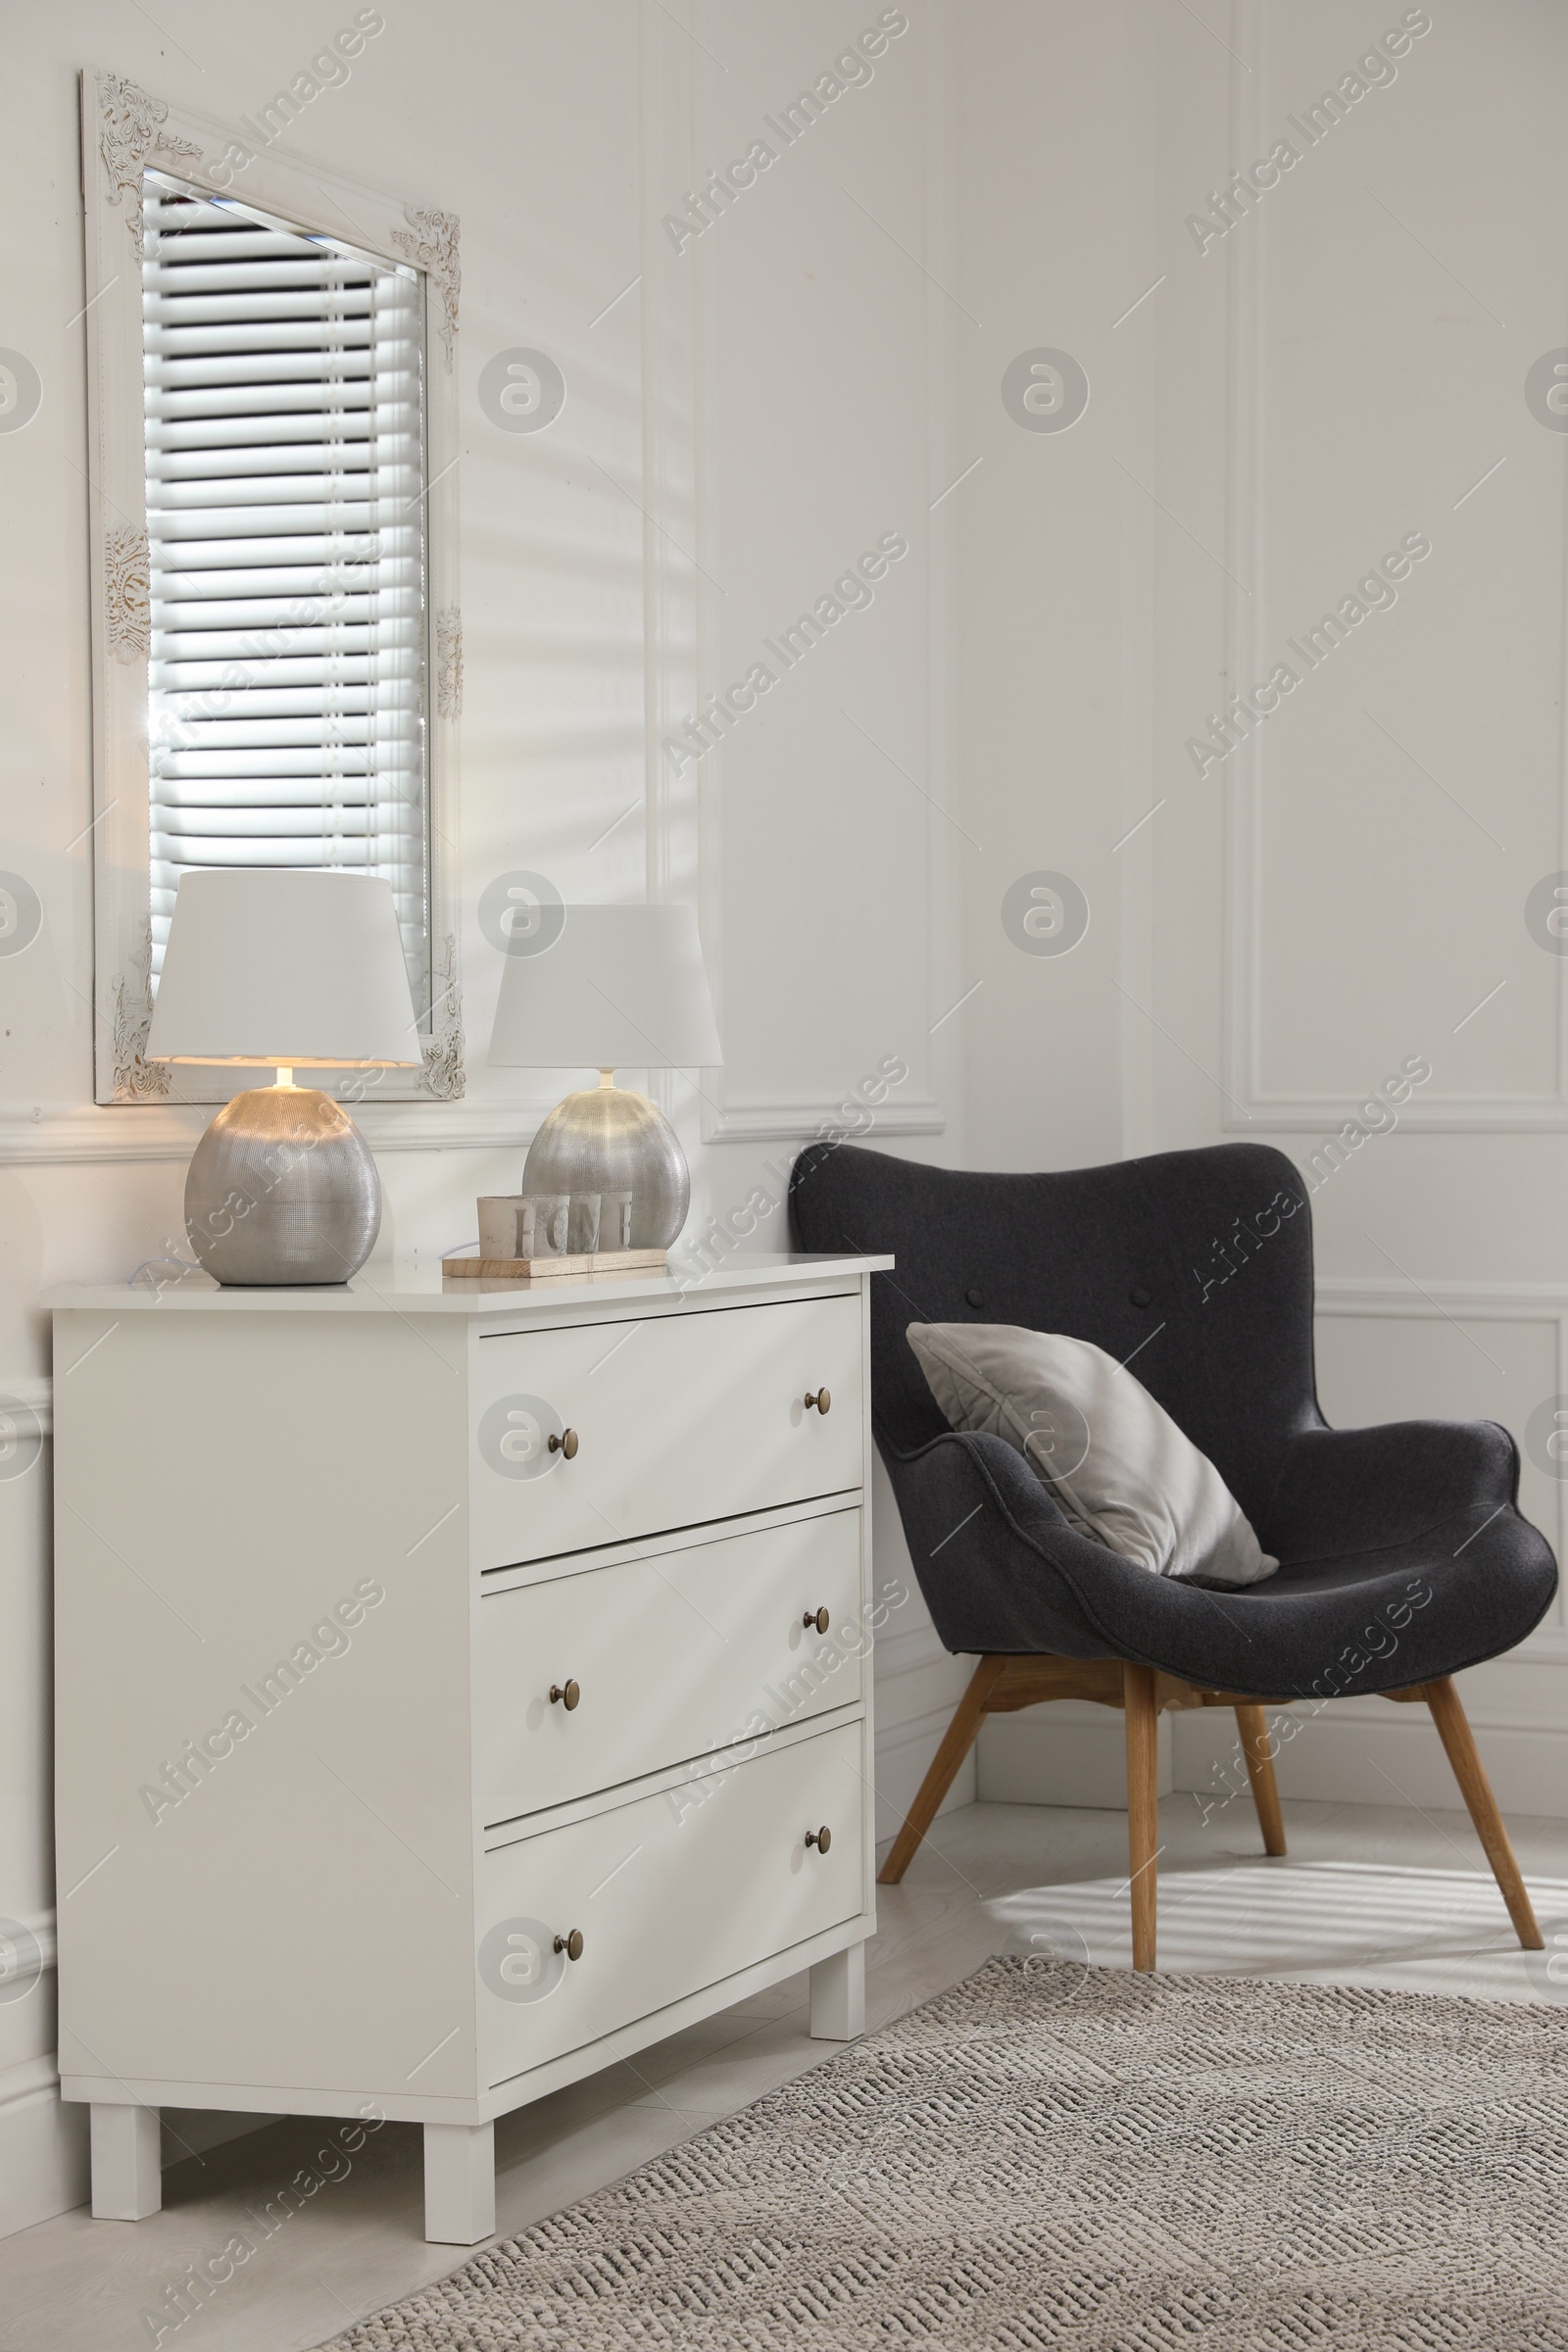 Photo of White chest of drawers, armchair and mirror in room. Interior design